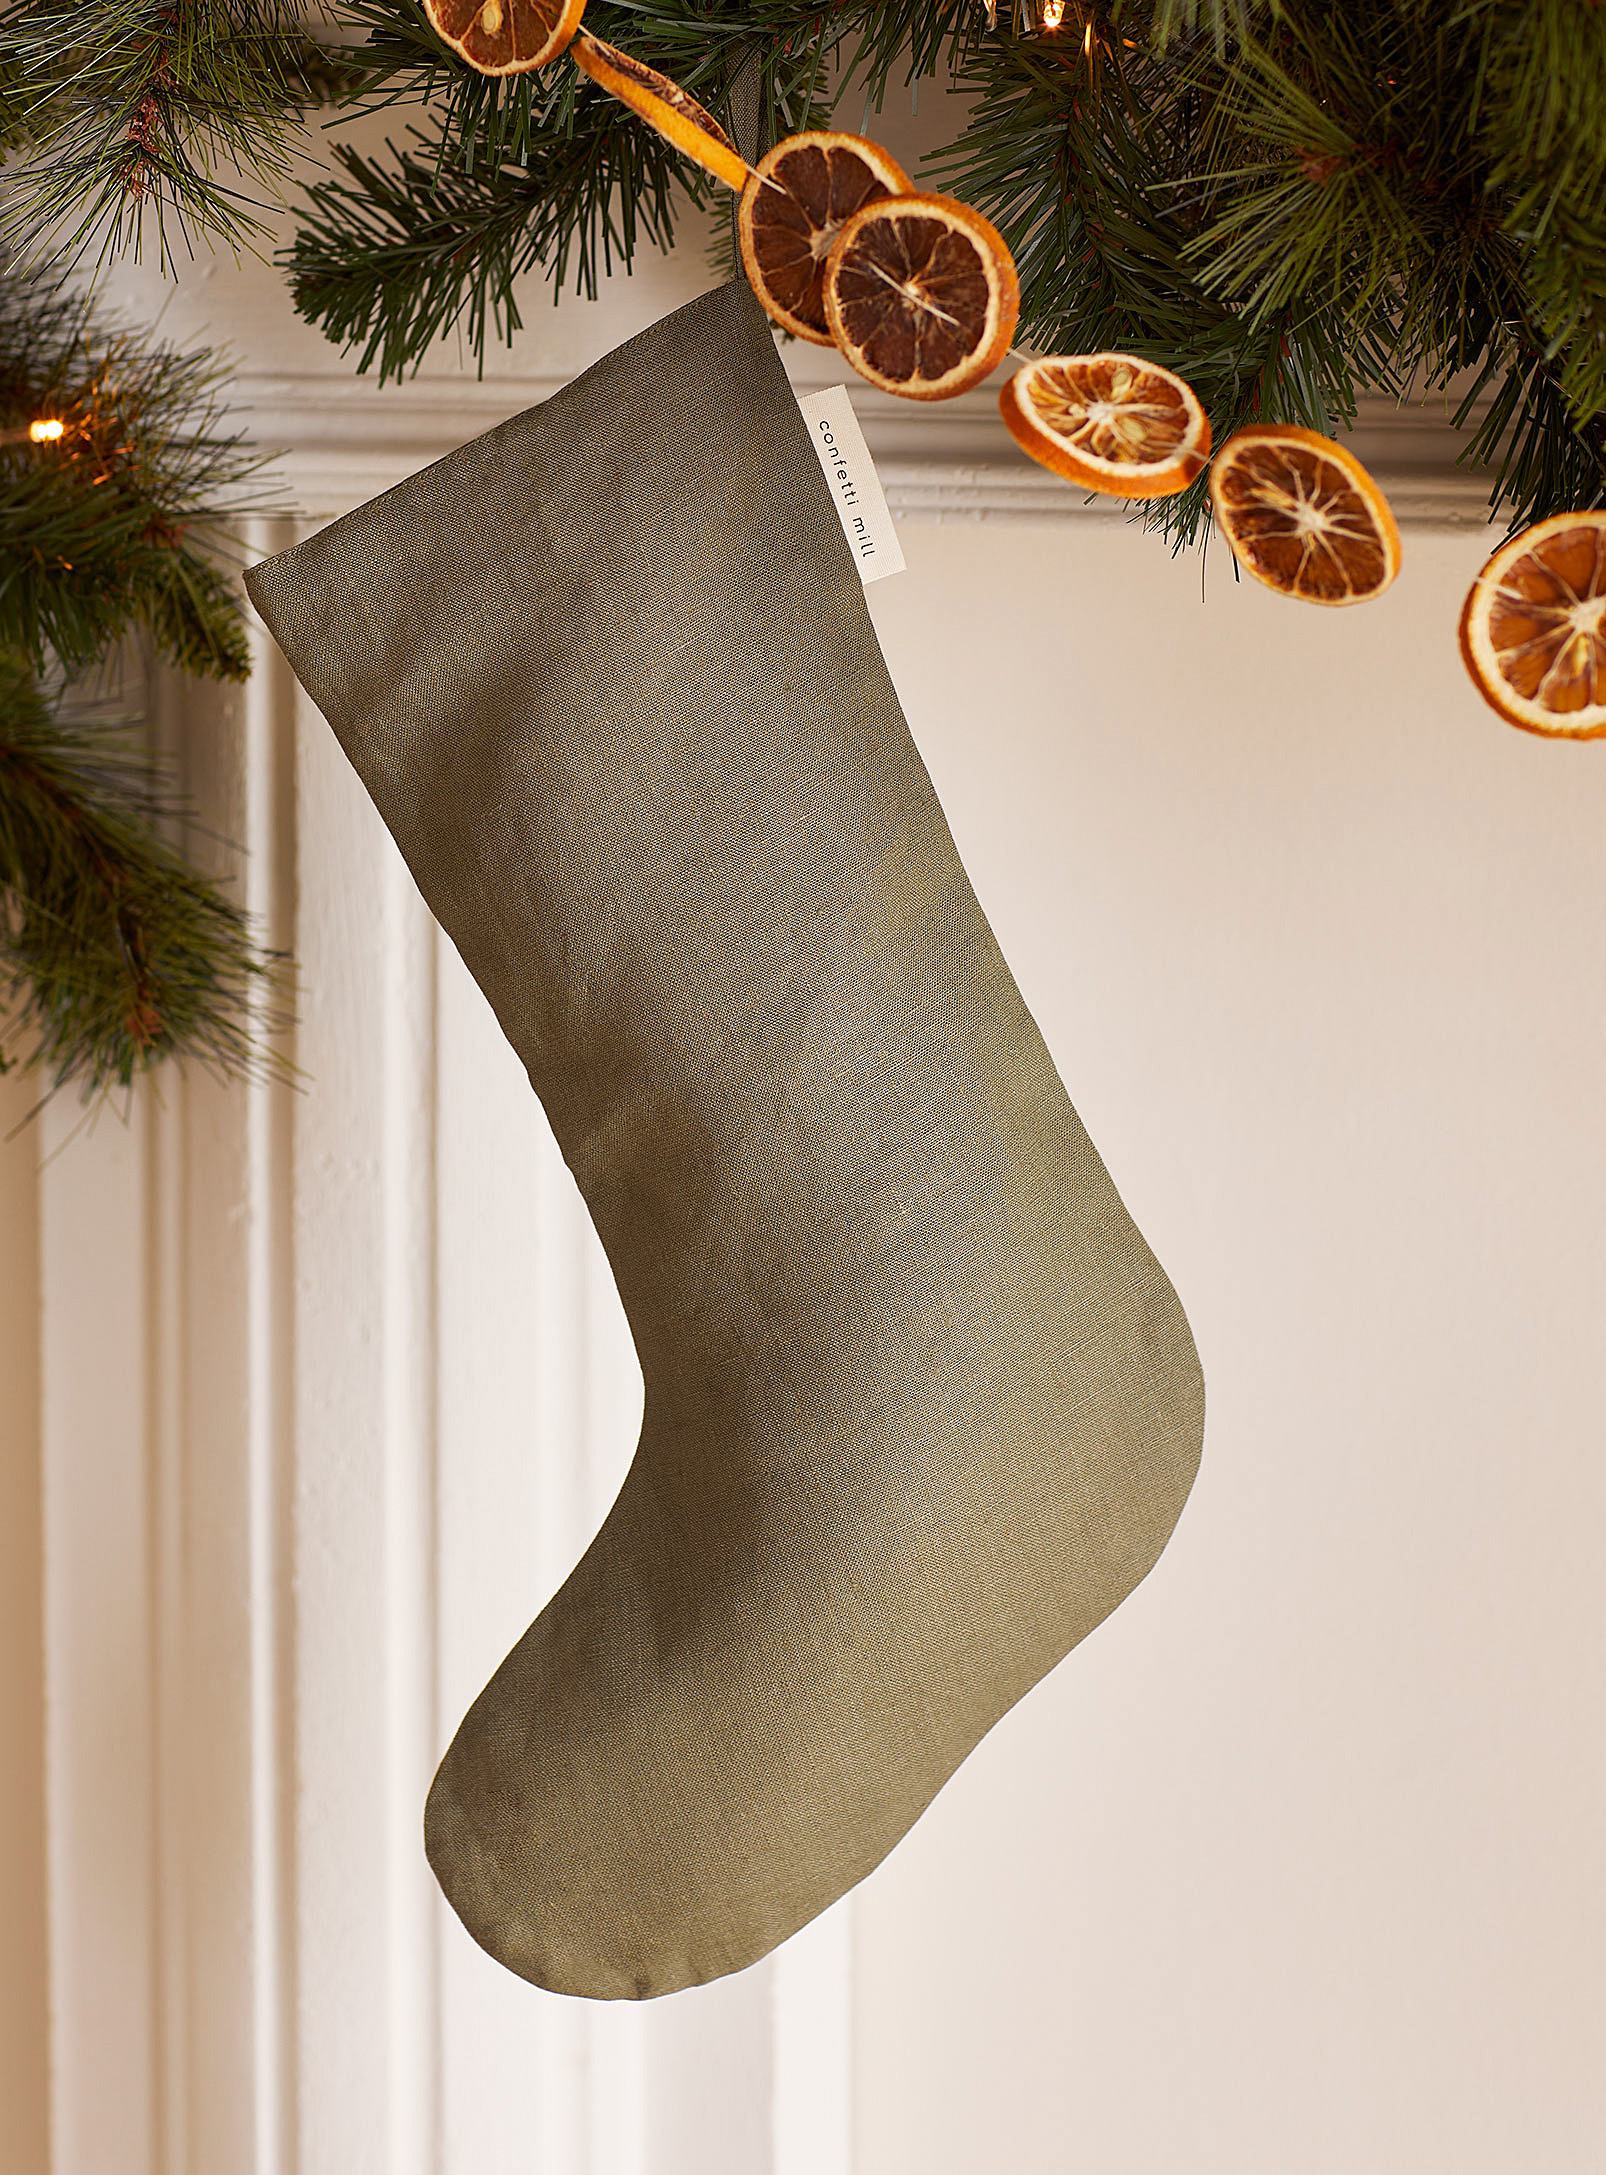 Confetti Mill Pure Linen Christmas Stocking In Mossy Green